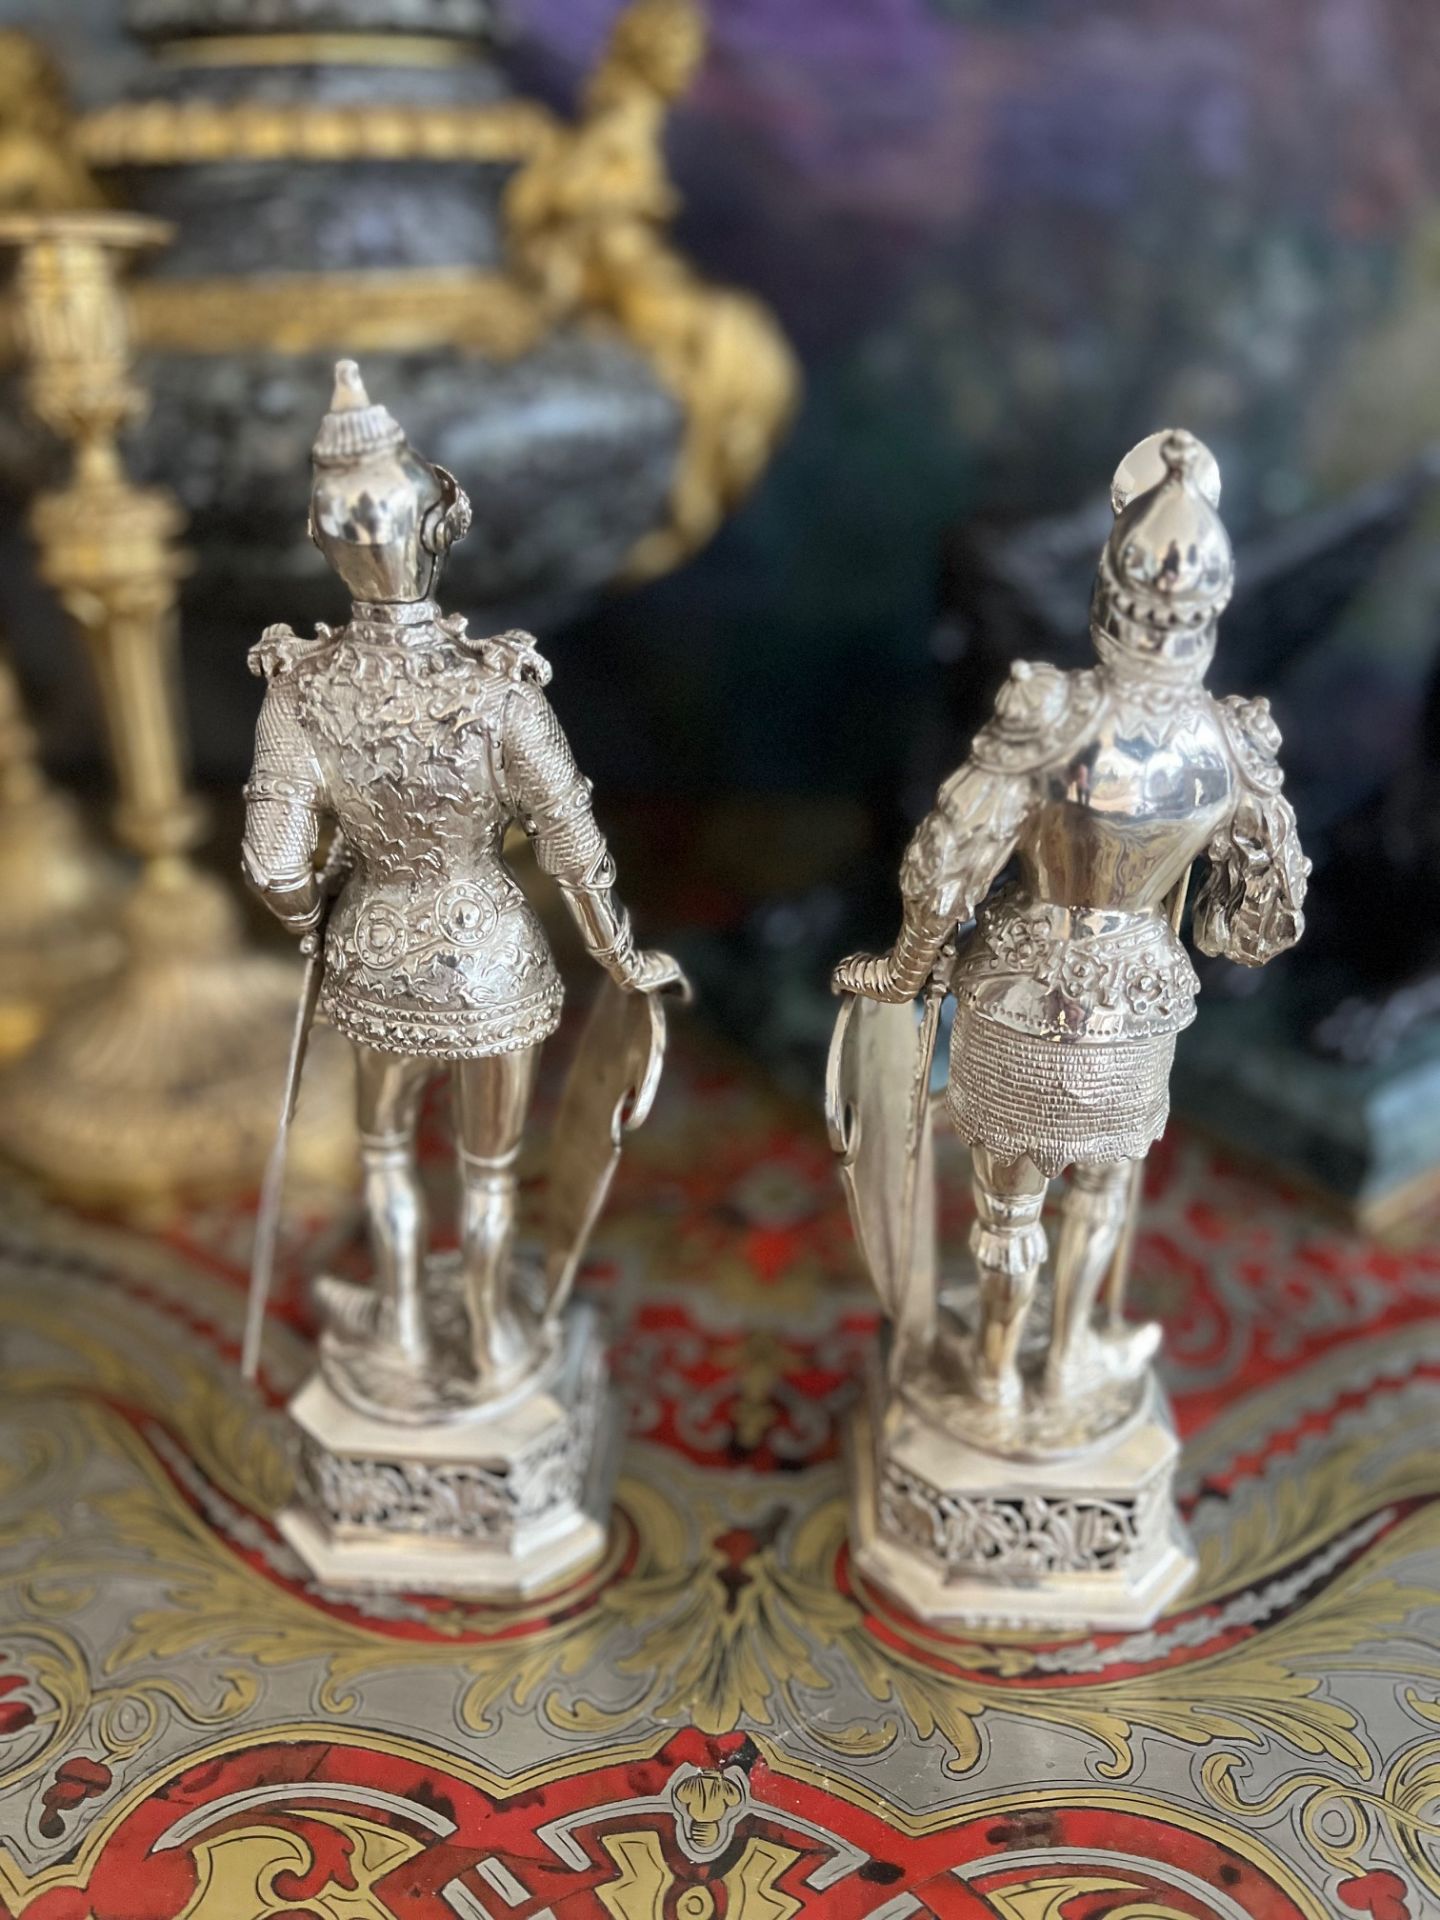 A PAIR OF SILVER FIGURES OF KNIGHTS, EARLY 20TH CENTURY, GERMAN - Image 2 of 7